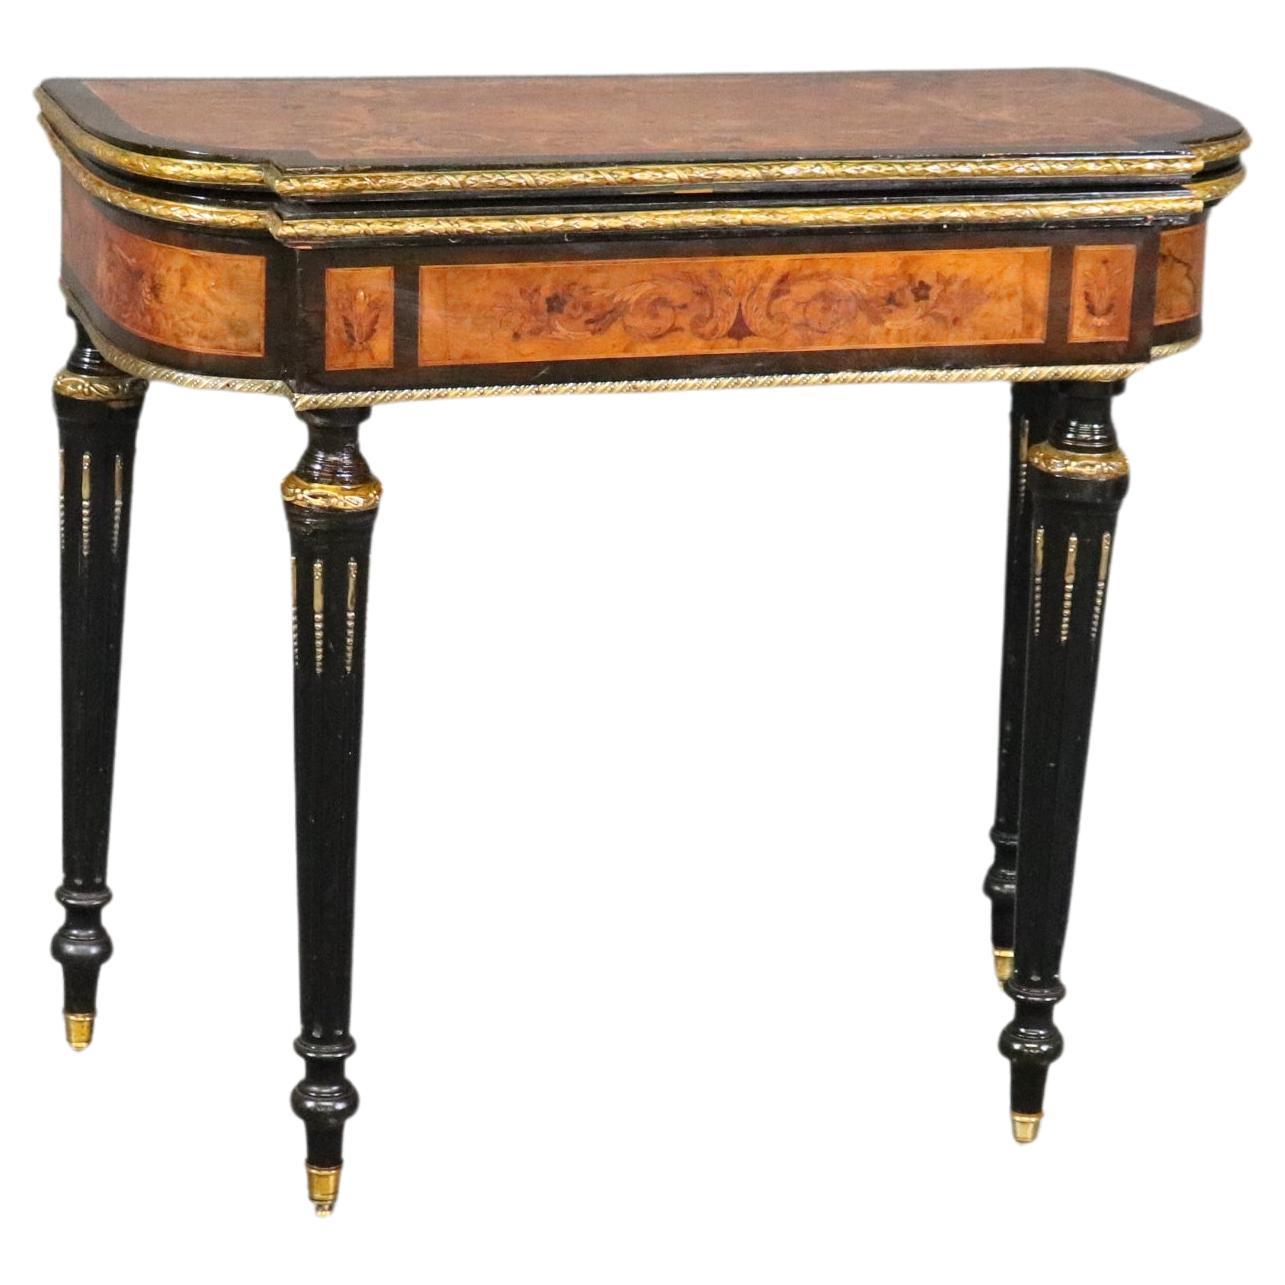 Superb Bronze Mounted Inlaid Walnut Ebonized French Games Table Circa 1870 For Sale